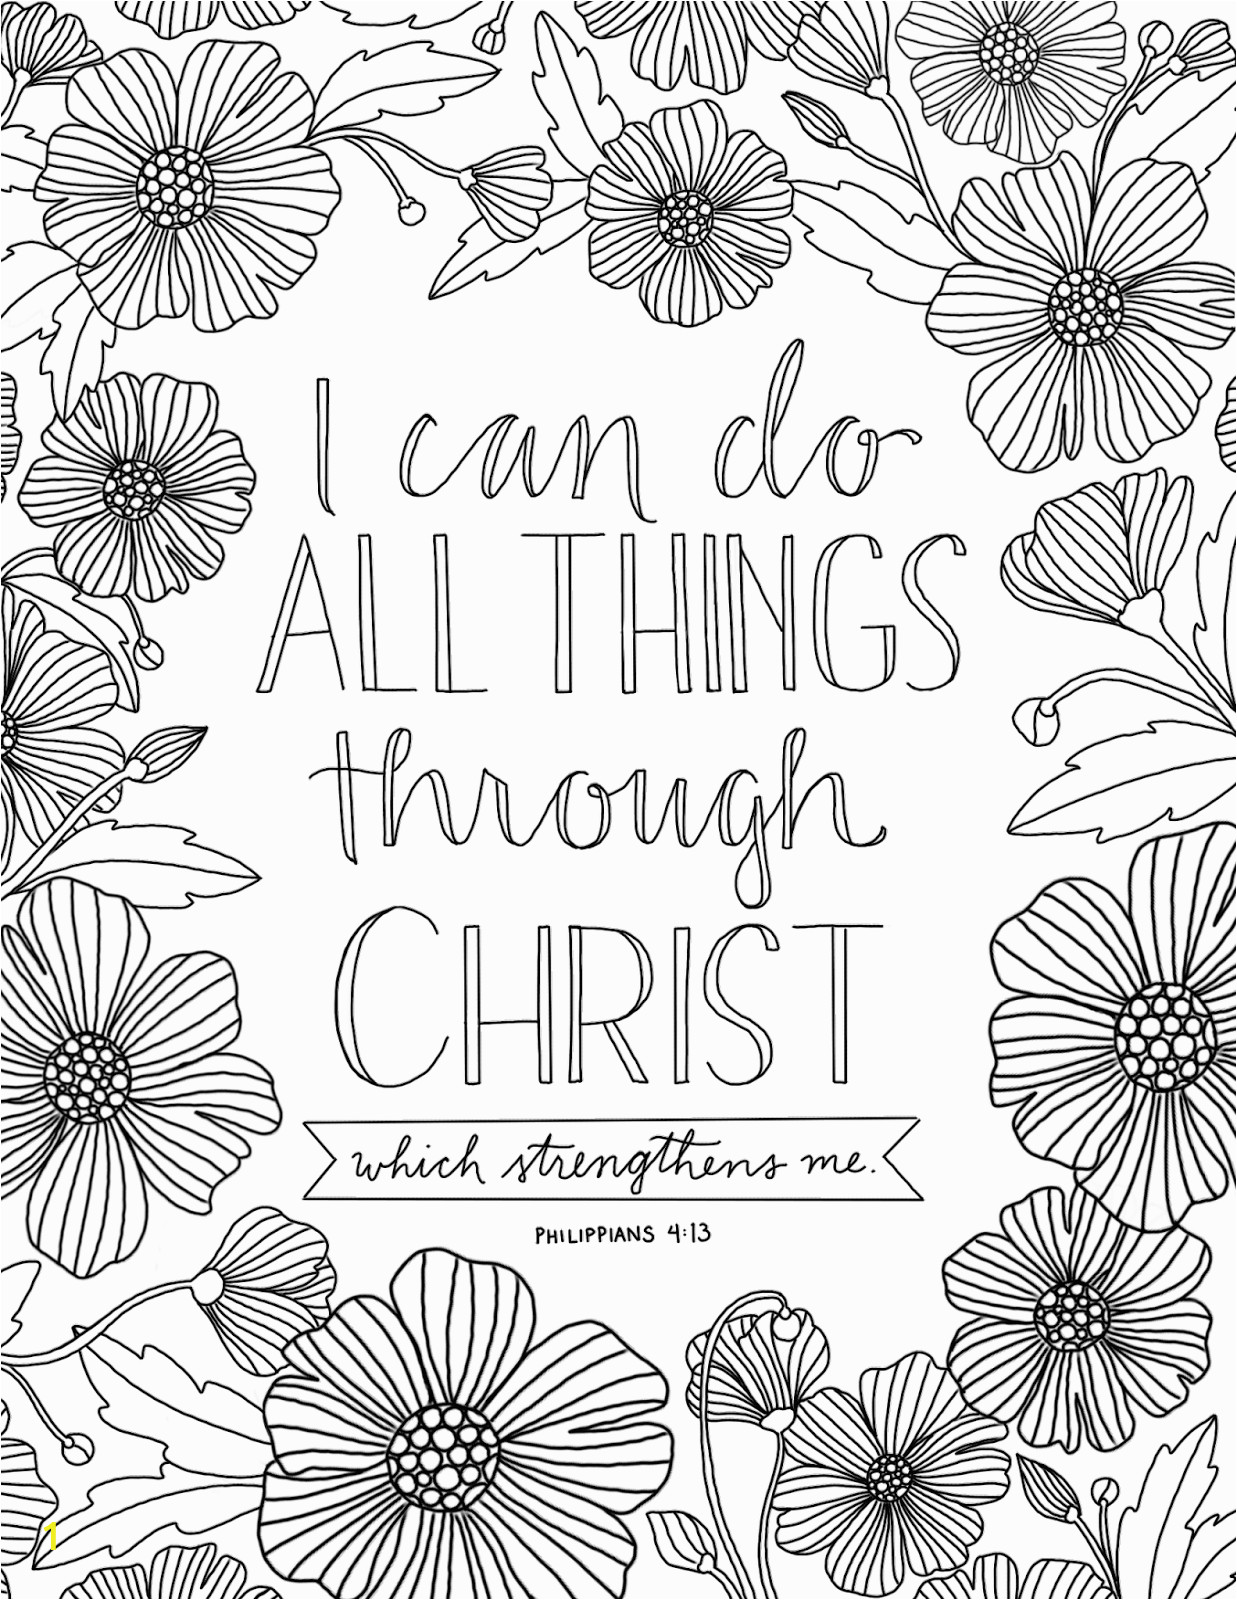 Philippians 4 4 Coloring Page Coloring Book Bible Verse Coloring Pages Just What I